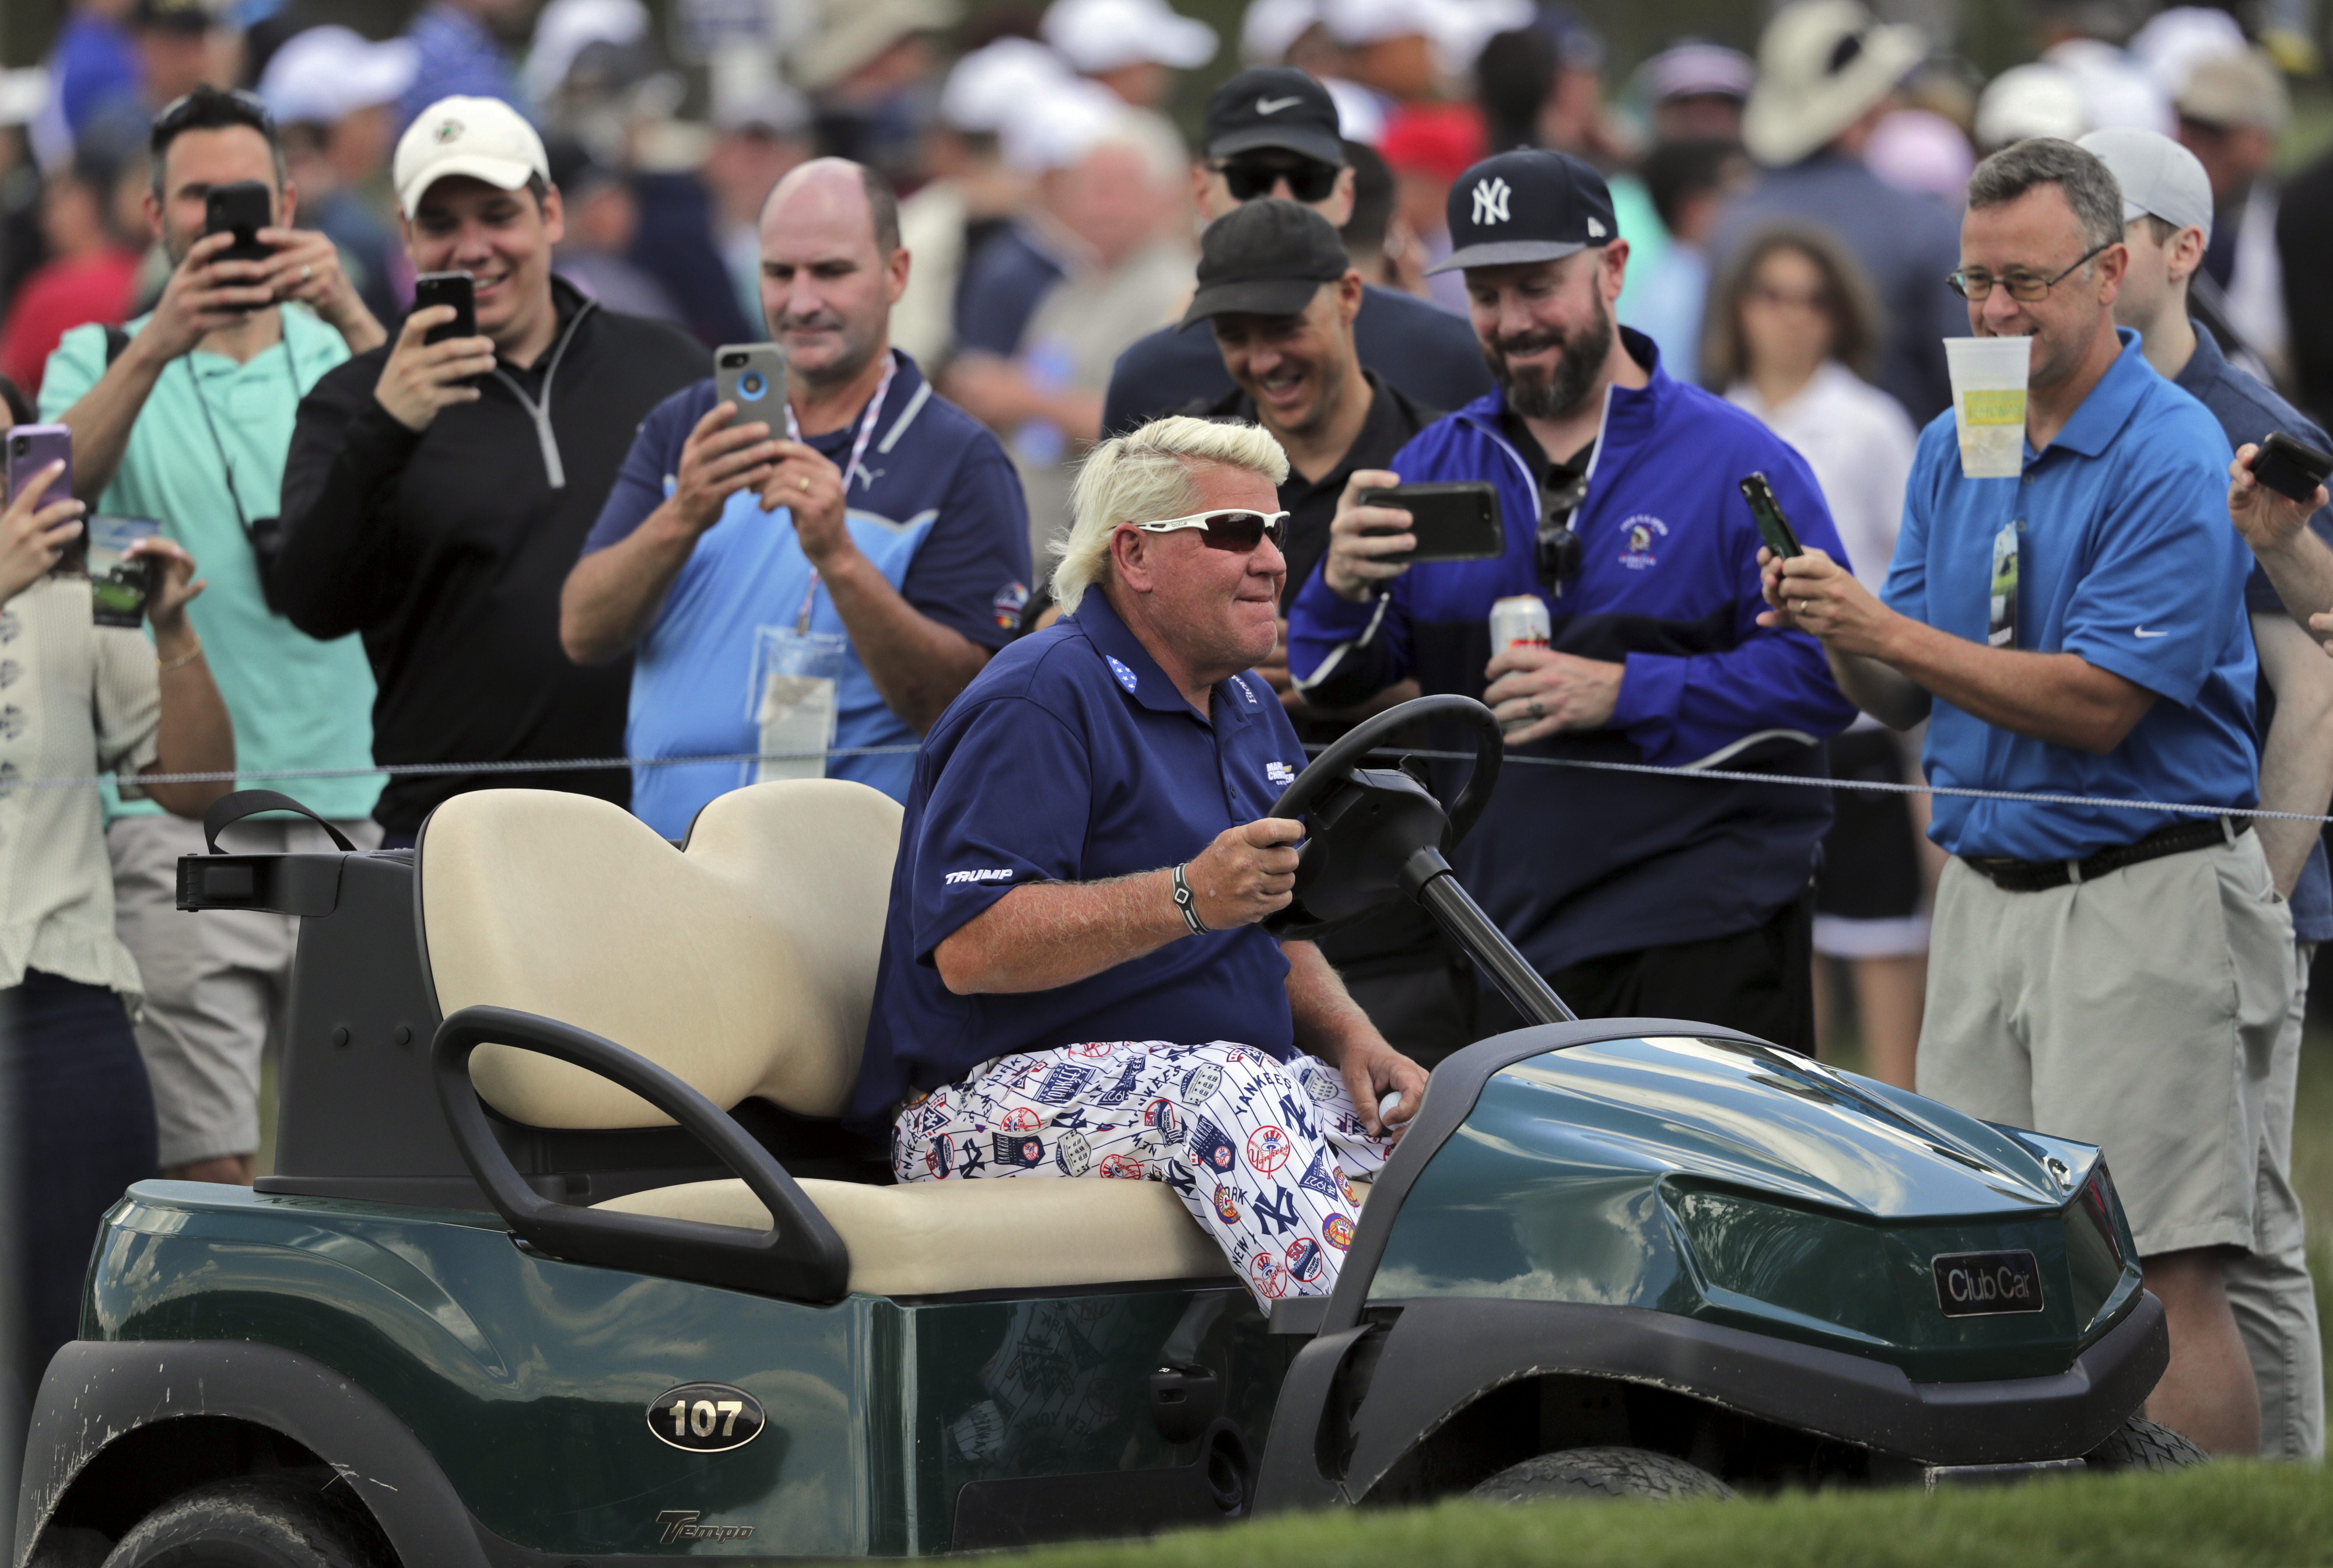 PICTURES: John Daly drives his way into PGA scene